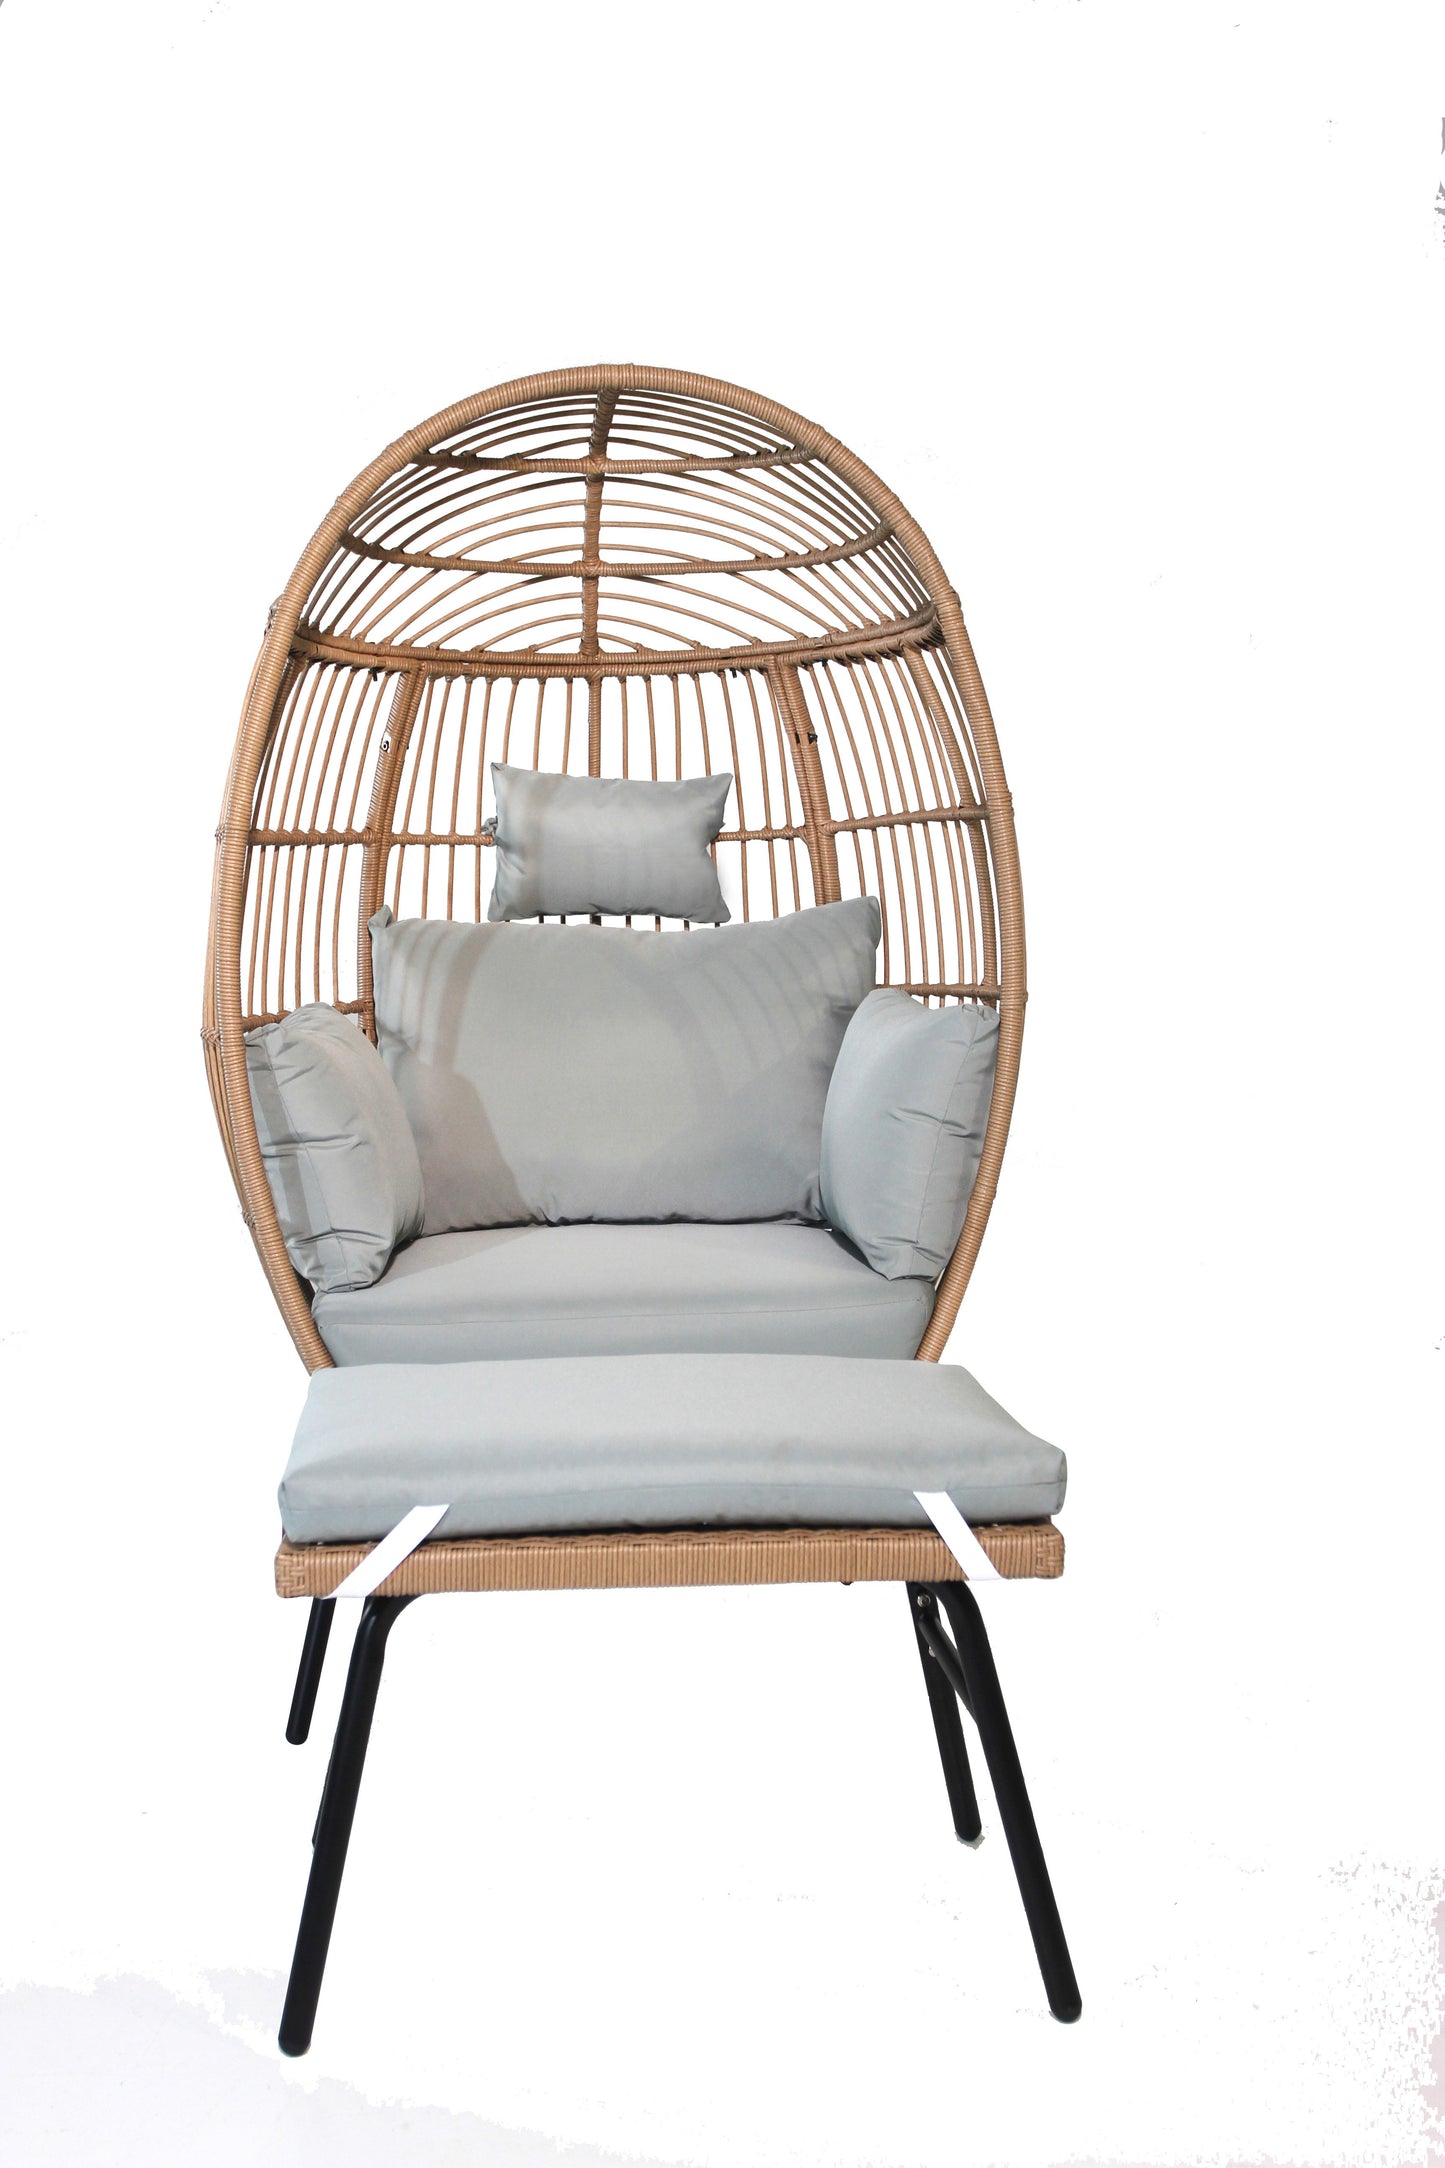 Outdoor Garden Wicker Egg Chair And Footstool Patio Chaise, With Cushions, Outdoor Indoor Basket Chair